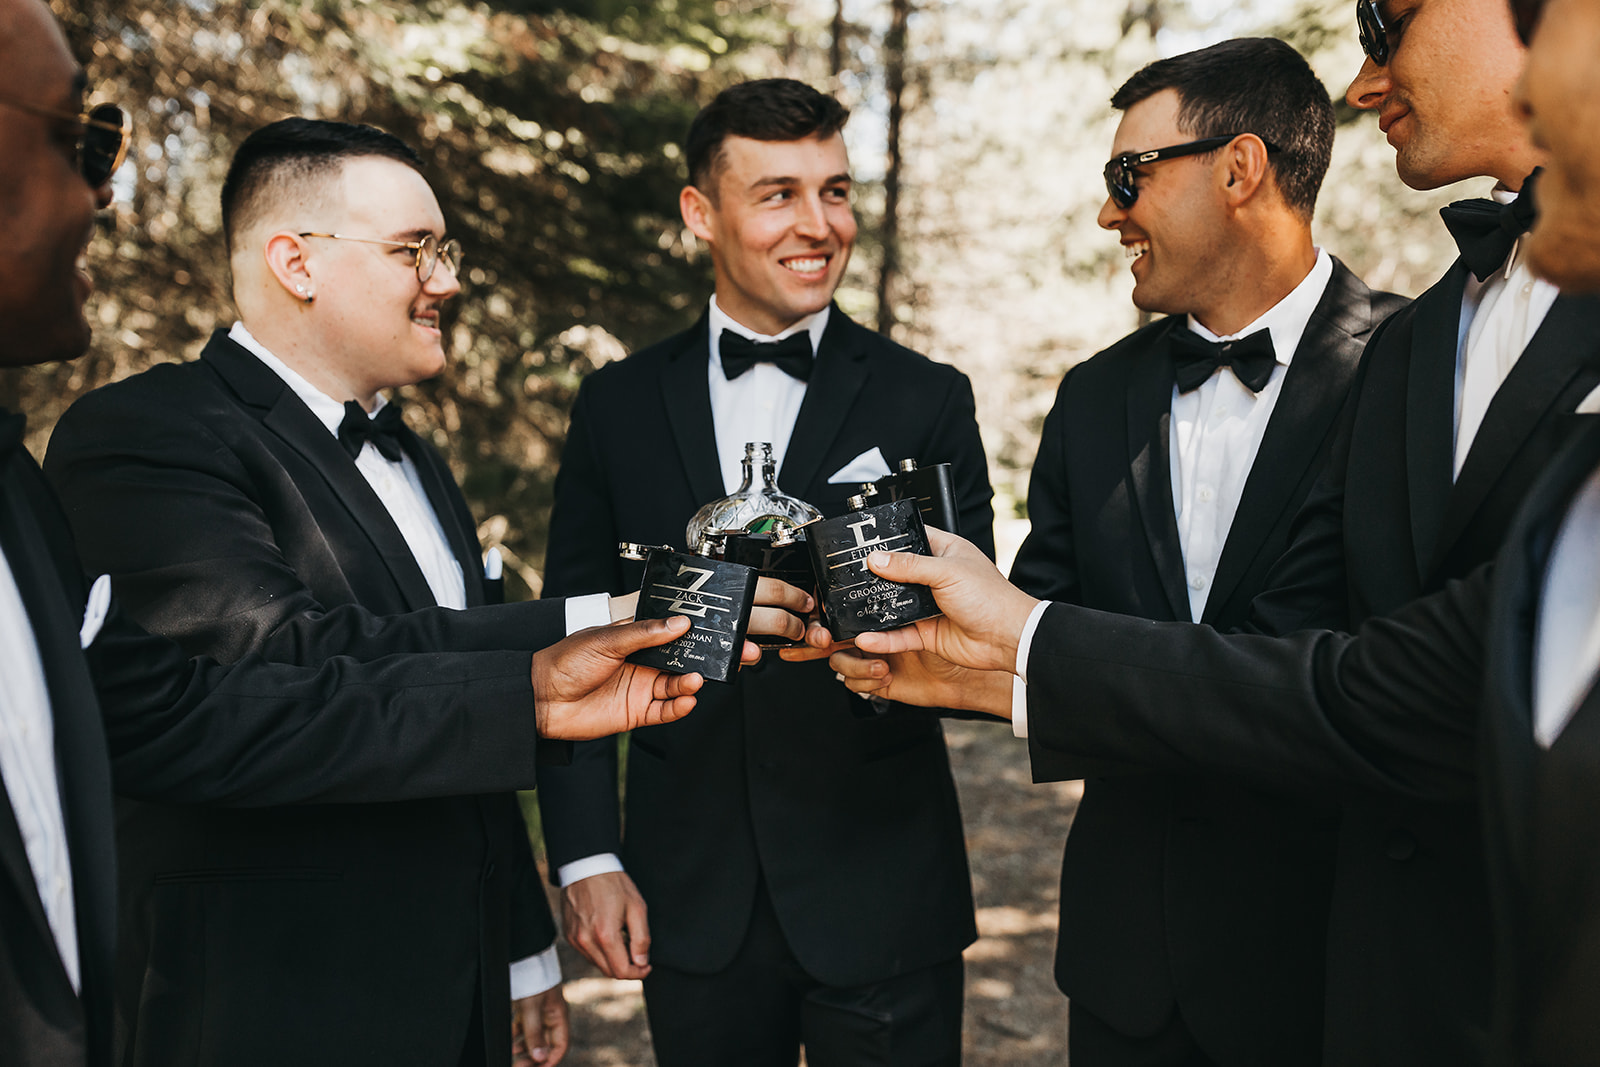 Groom and groomsmen sharing a drink before the wedding with custom wedding flasks.